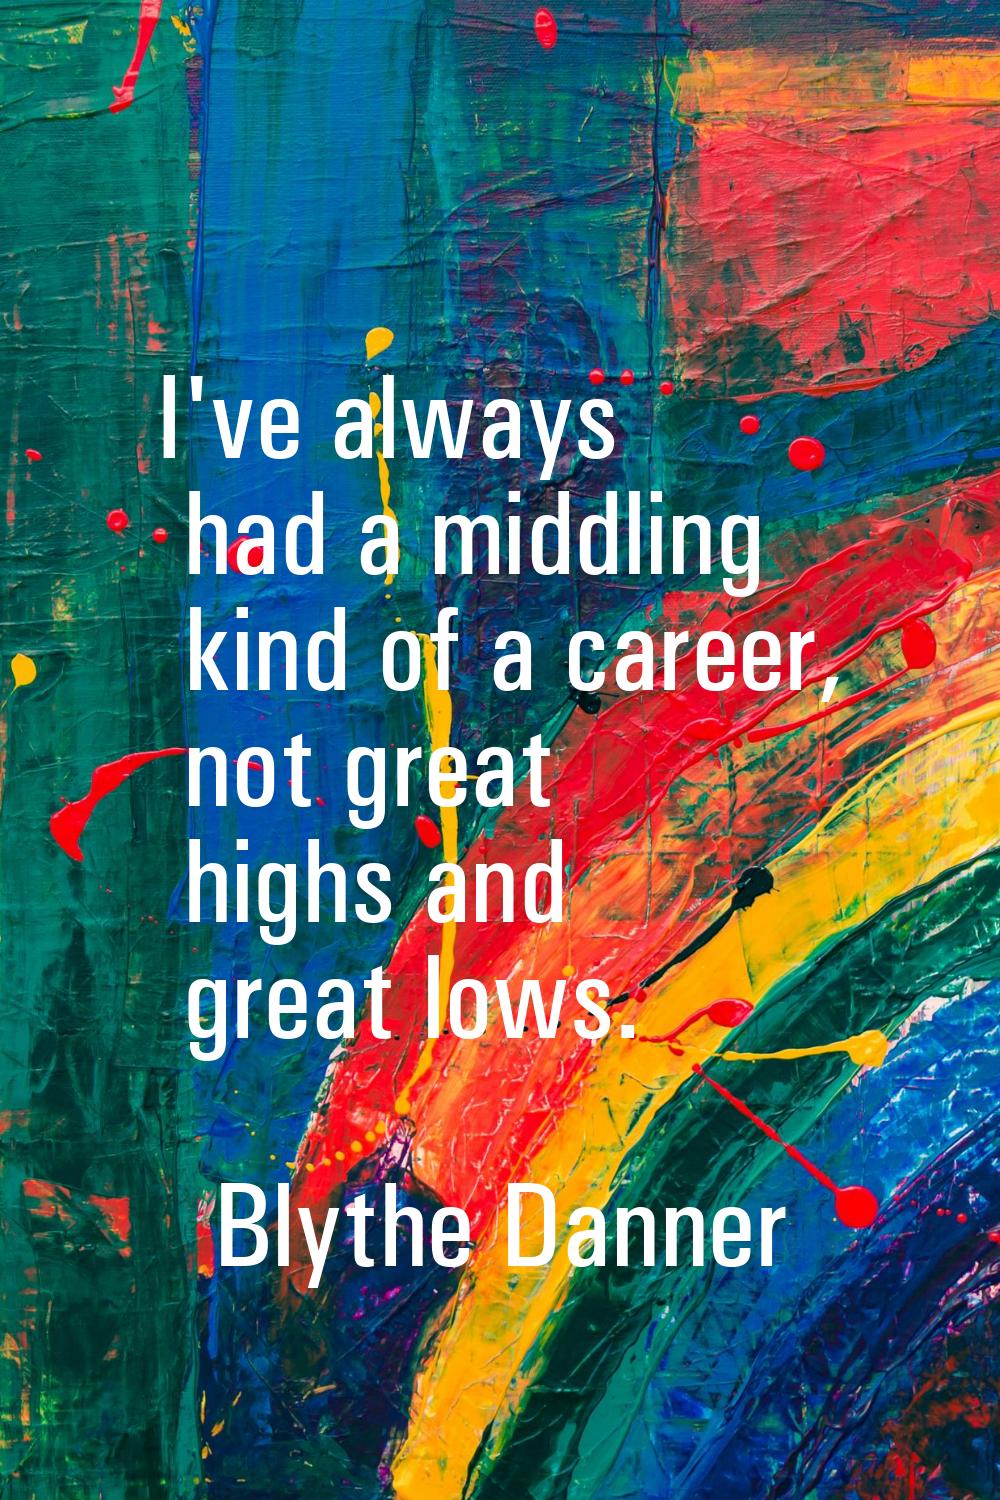 I've always had a middling kind of a career, not great highs and great lows.